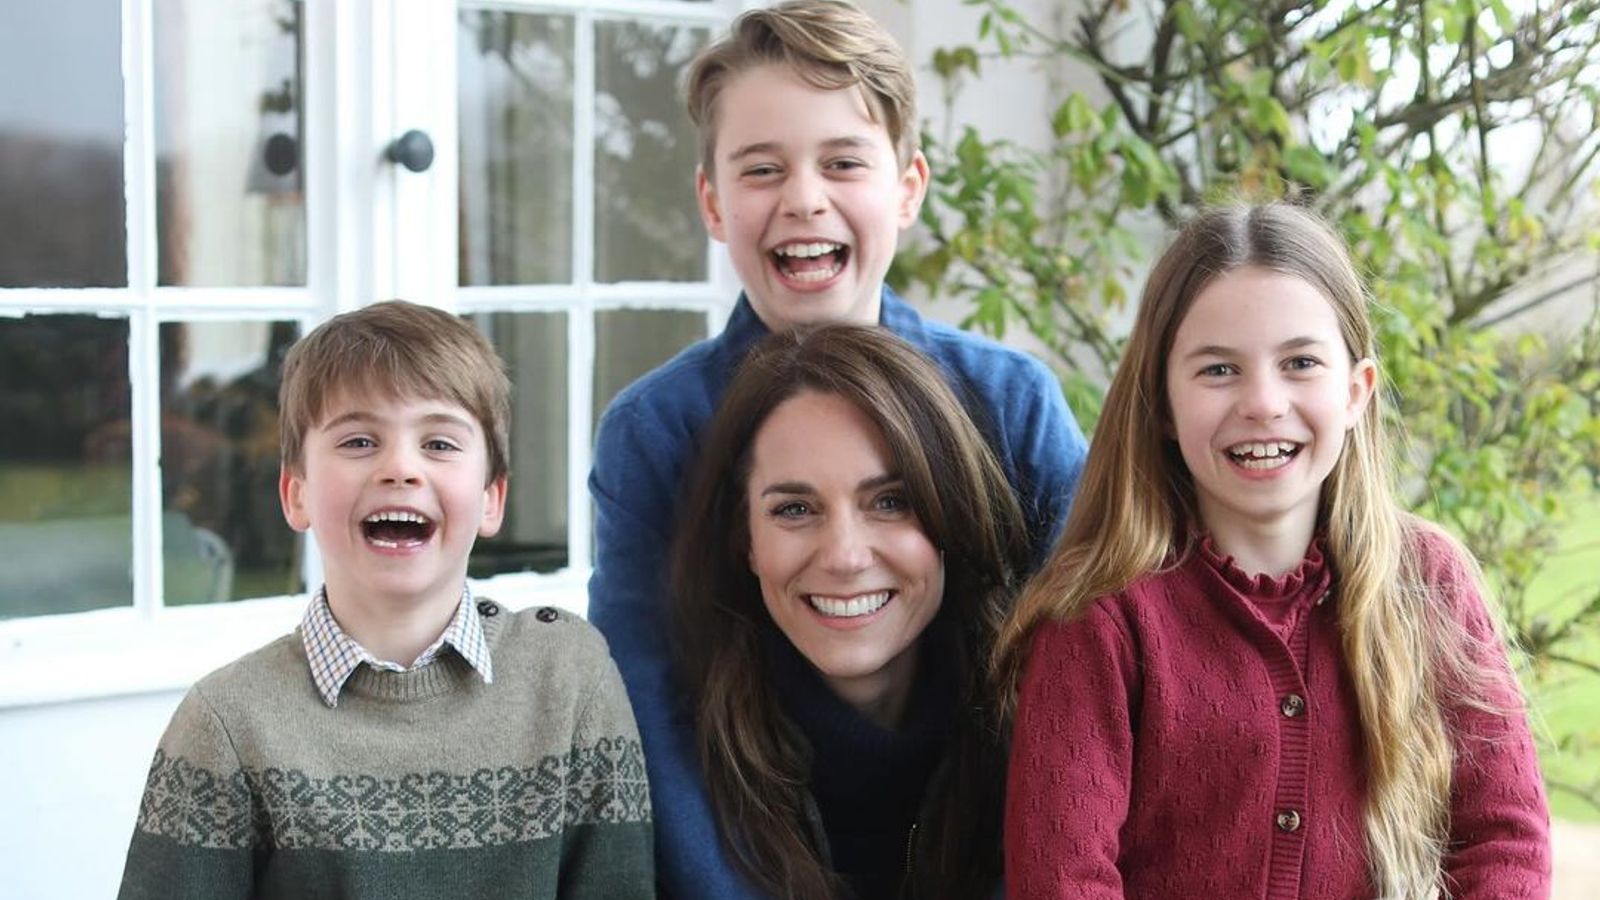 Kate Middleton's Mother's Day Photo Under Fire for Authenticity